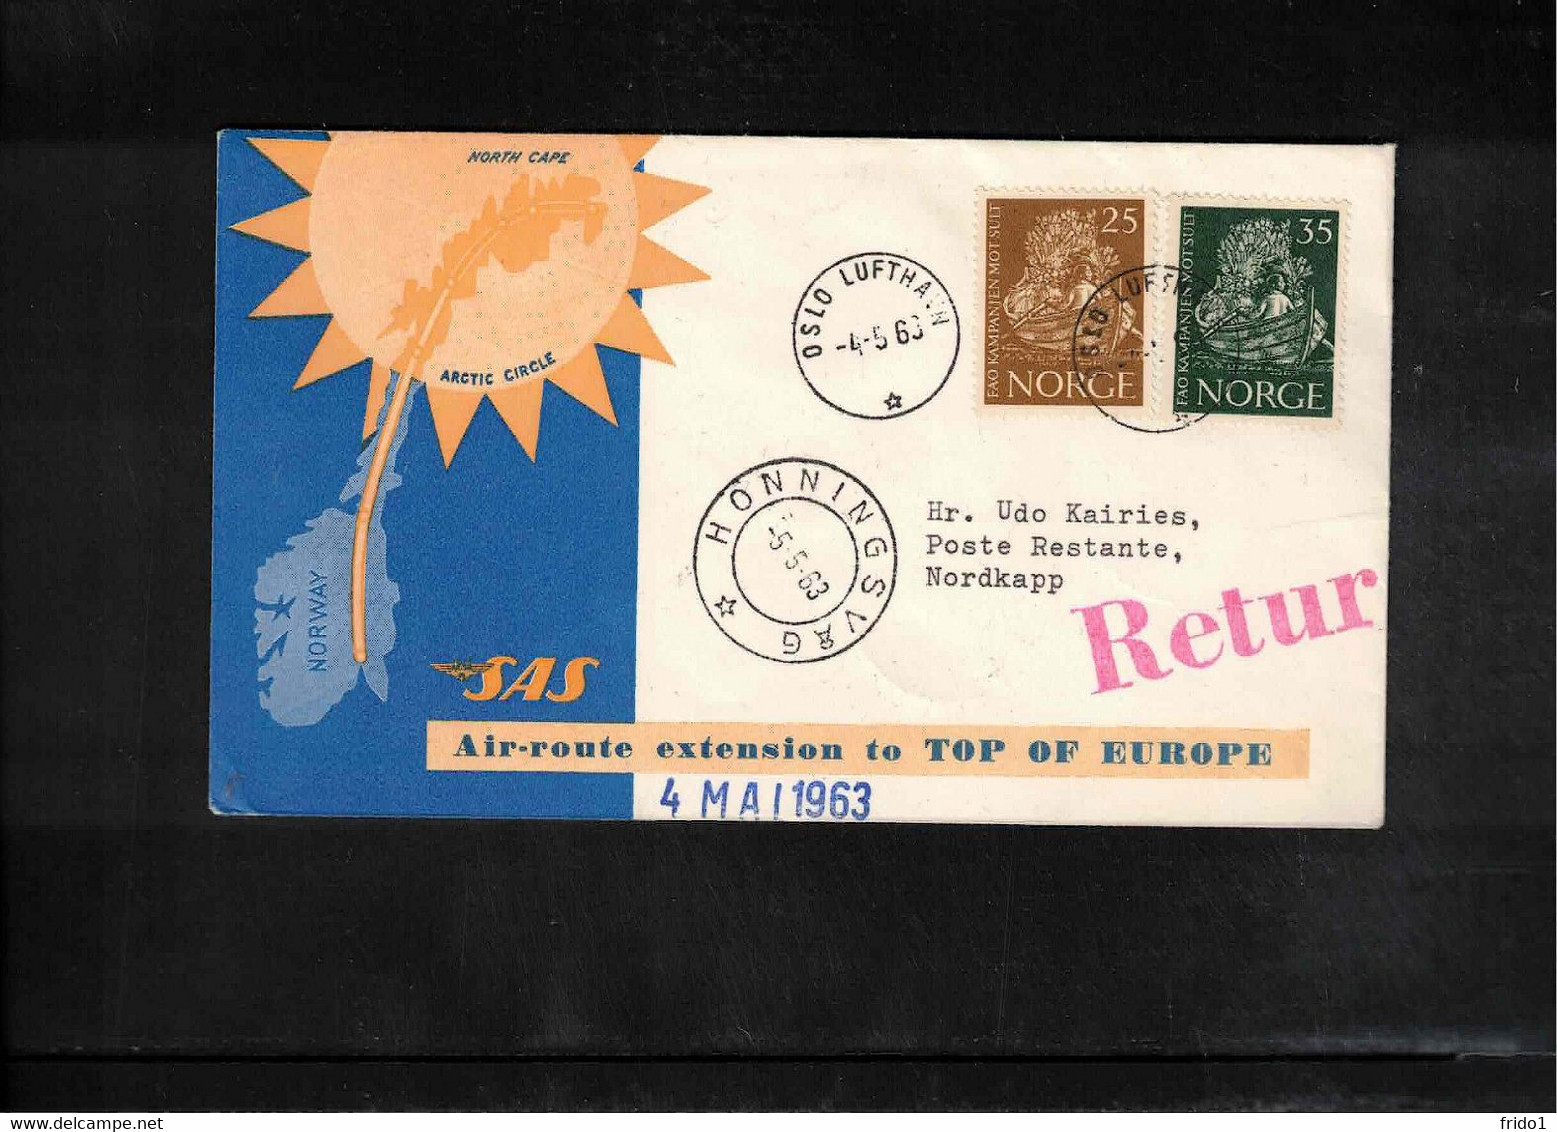 Norway 1963 SAS Flight From Oslo To Nordcap Interesting Letter - Covers & Documents